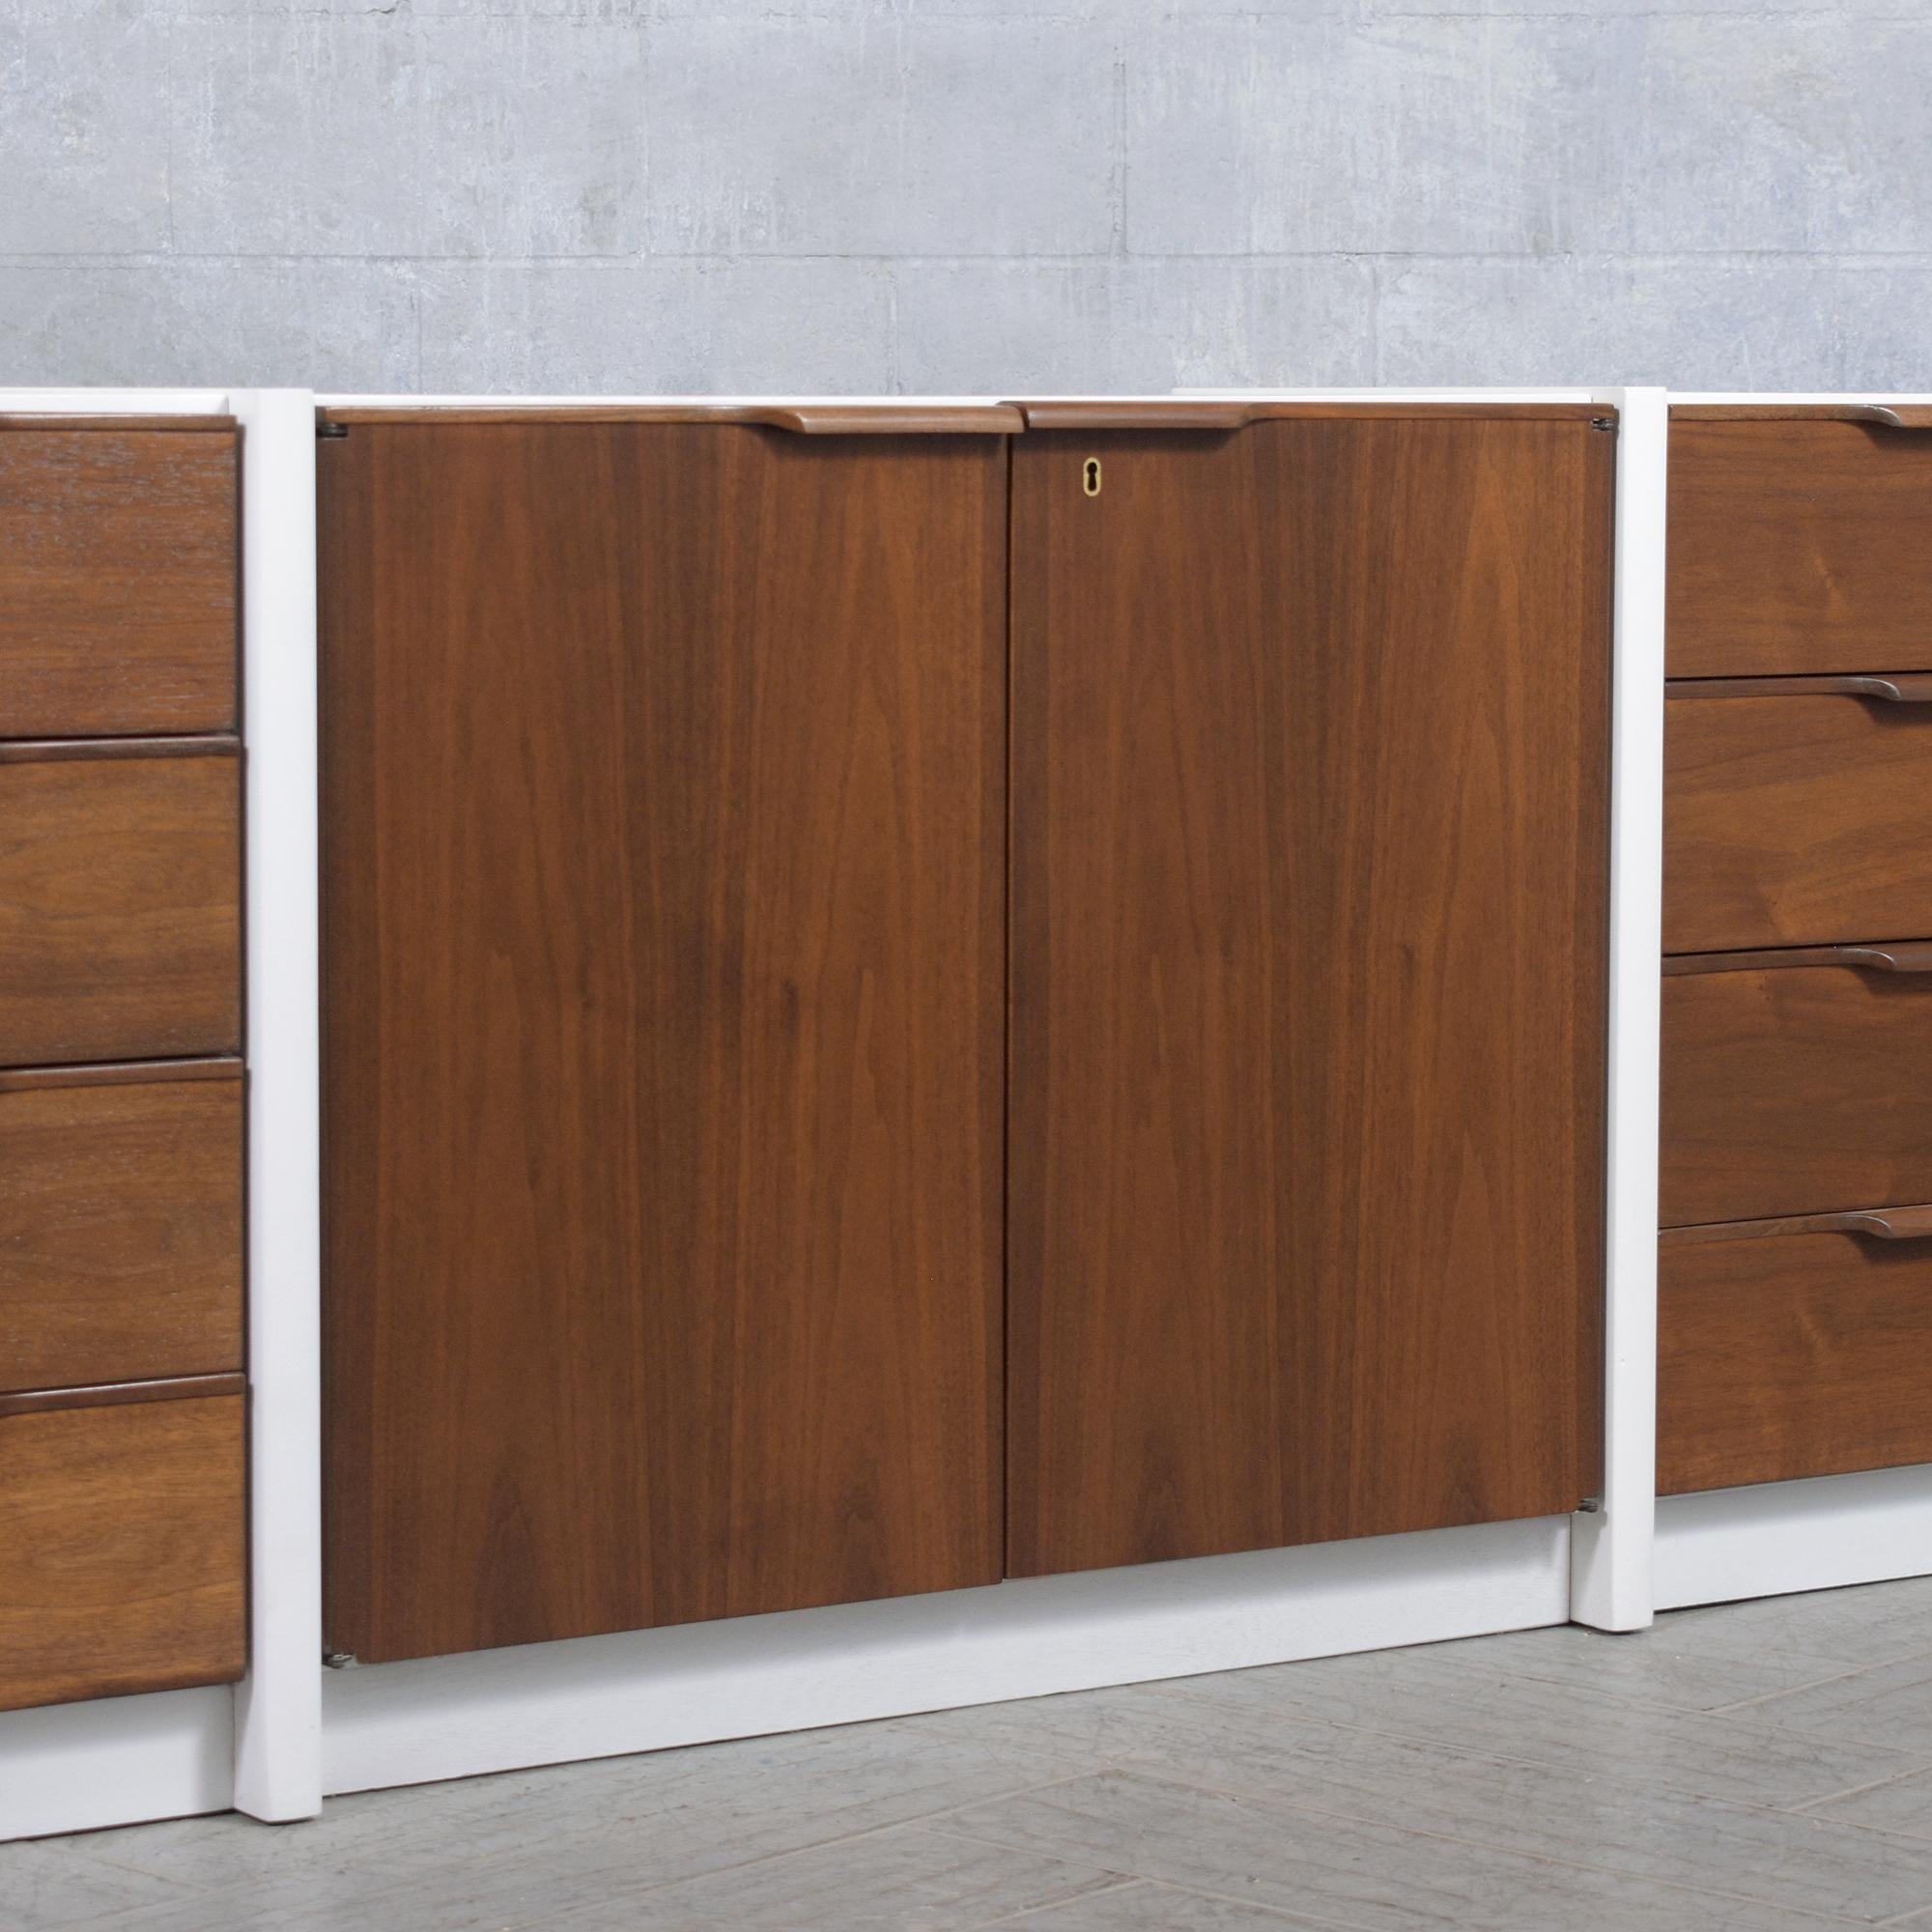 1960s Danish Executive Cabinet: Mid-Century Design and Craftsmanship For Sale 4